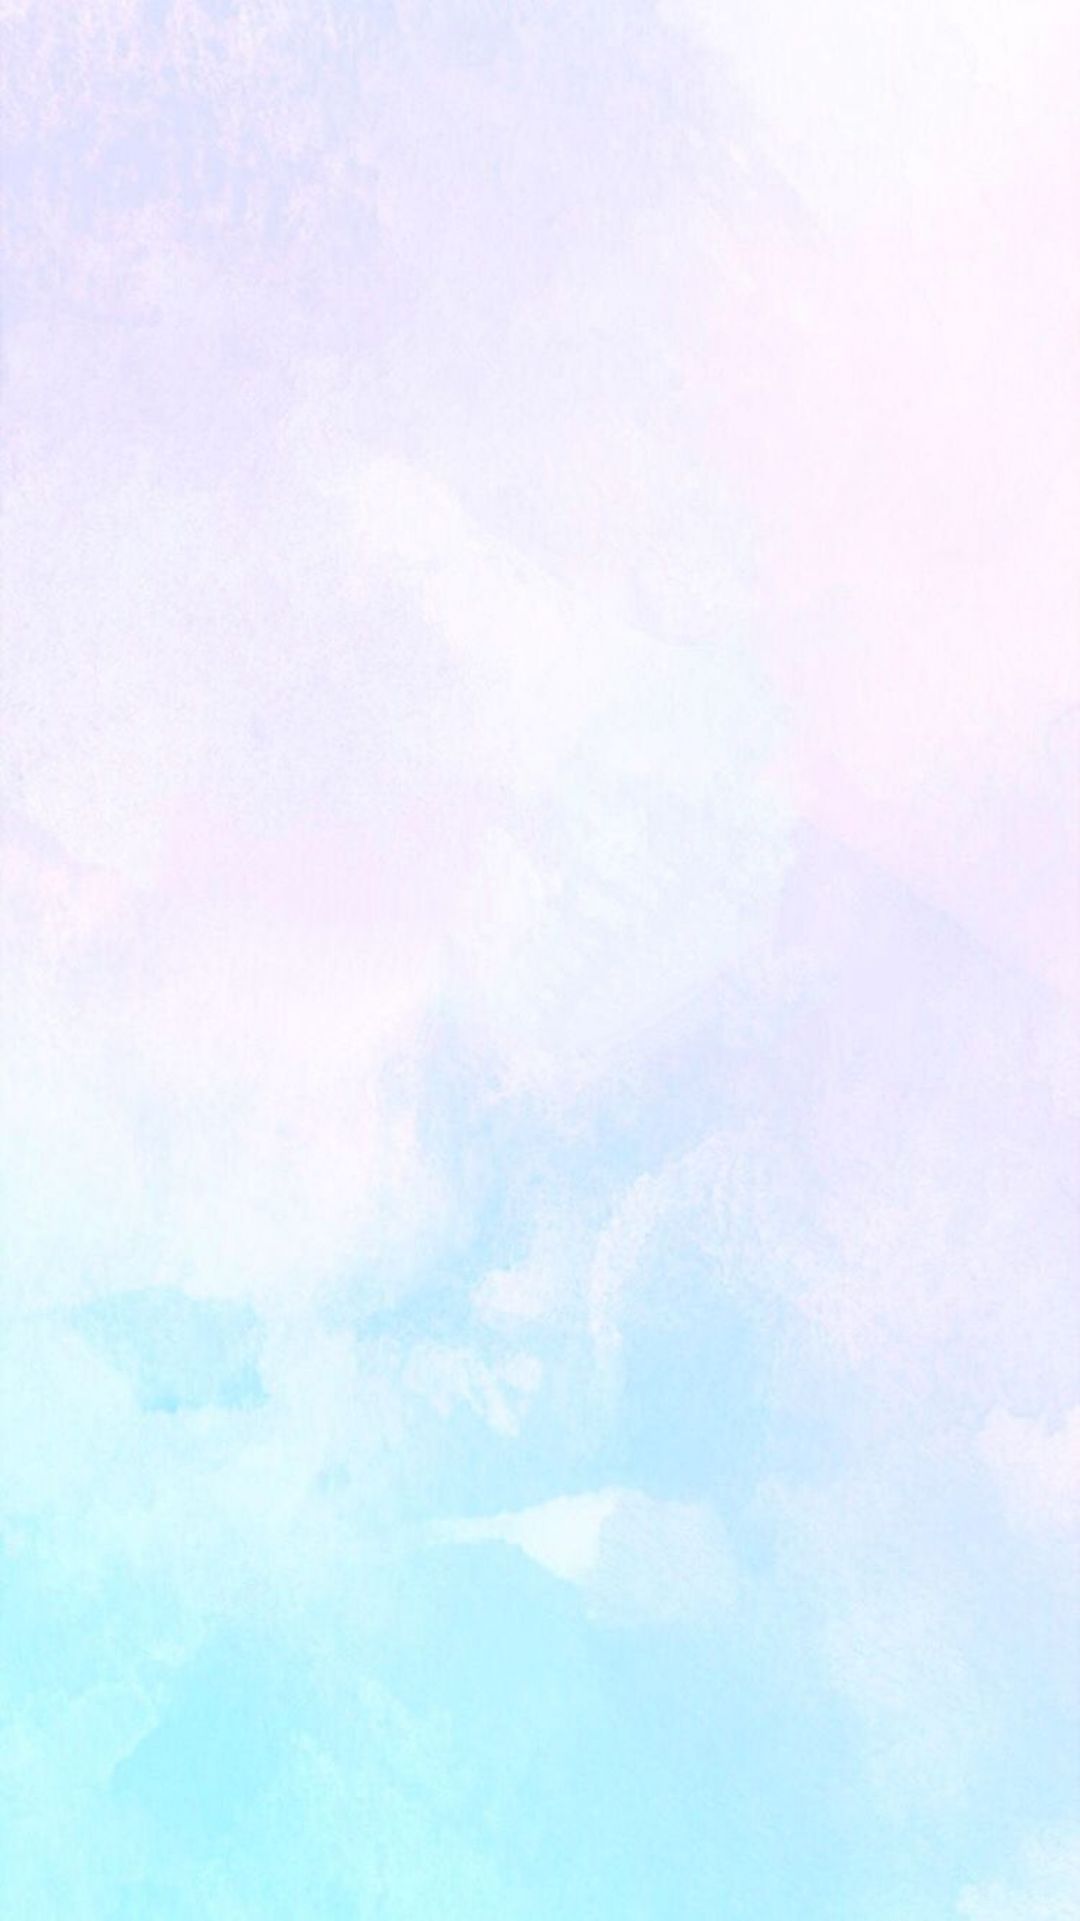 Pastel Aesthetic Clouds Wallpapers